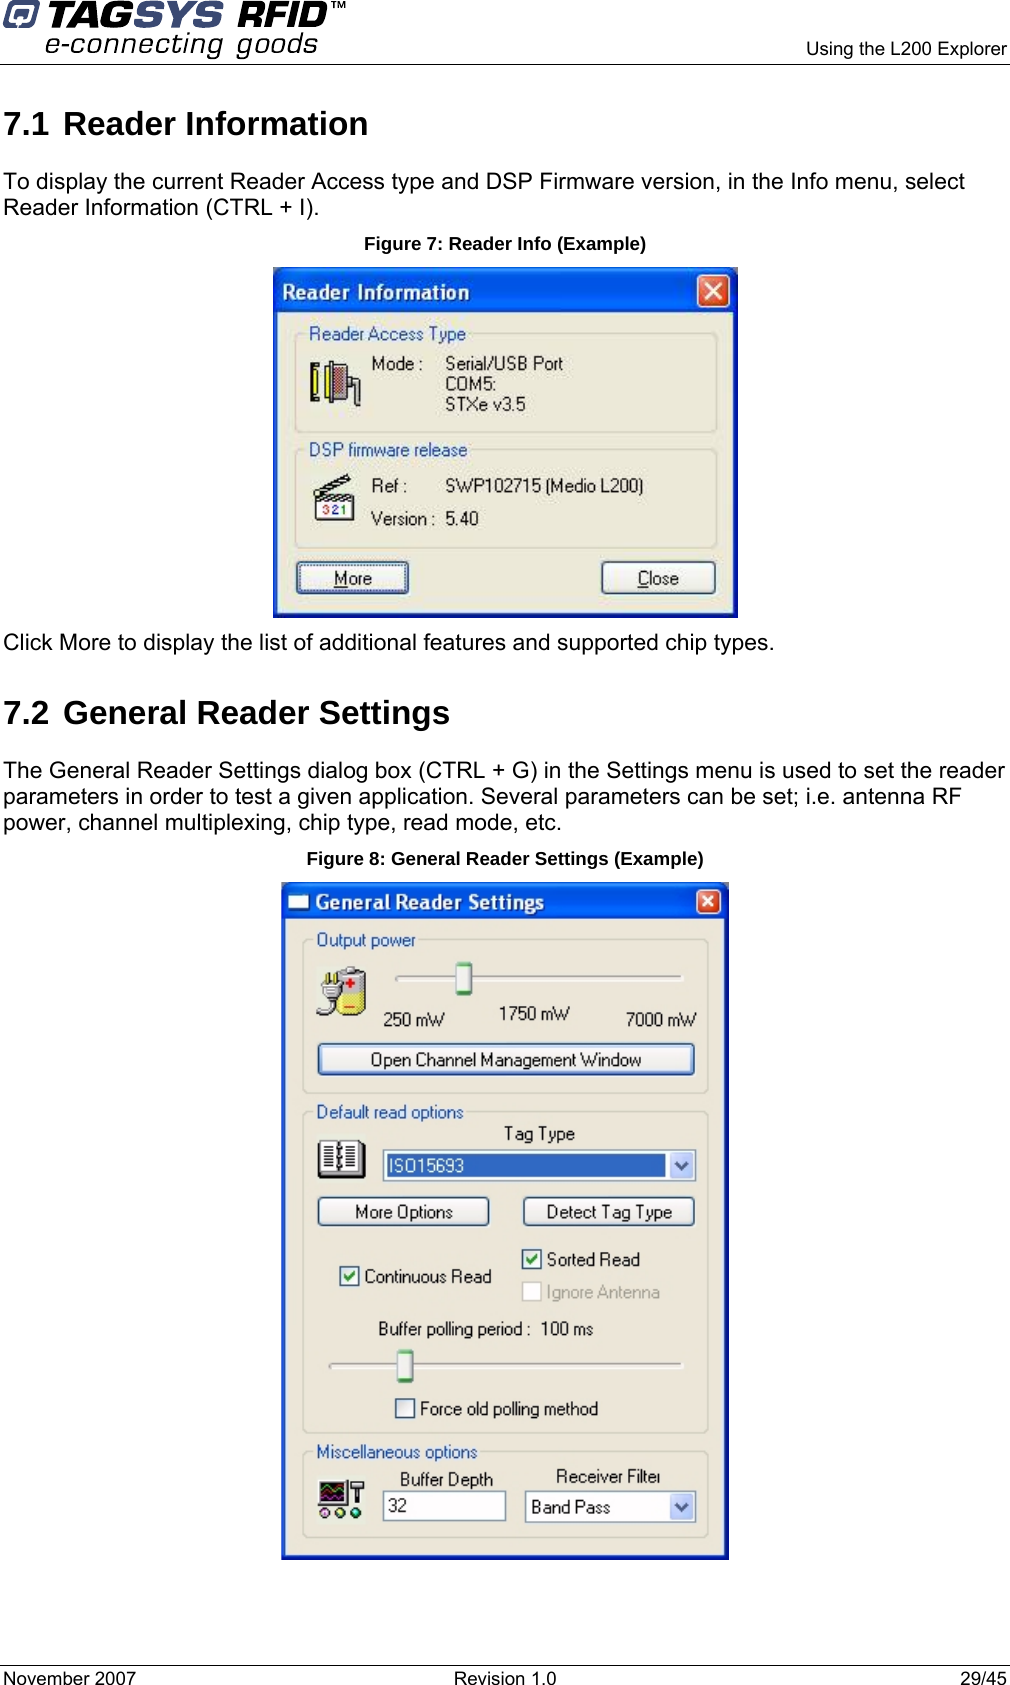     Using the L200 Explorer November 2007  Revision 1.0  29/45  7.1 Reader Information To display the current Reader Access type and DSP Firmware version, in the Info menu, select Reader Information (CTRL + I). Figure 7: Reader Info (Example)  Click More to display the list of additional features and supported chip types. 7.2 General Reader Settings  The General Reader Settings dialog box (CTRL + G) in the Settings menu is used to set the reader parameters in order to test a given application. Several parameters can be set; i.e. antenna RF power, channel multiplexing, chip type, read mode, etc.   Figure 8: General Reader Settings (Example)  